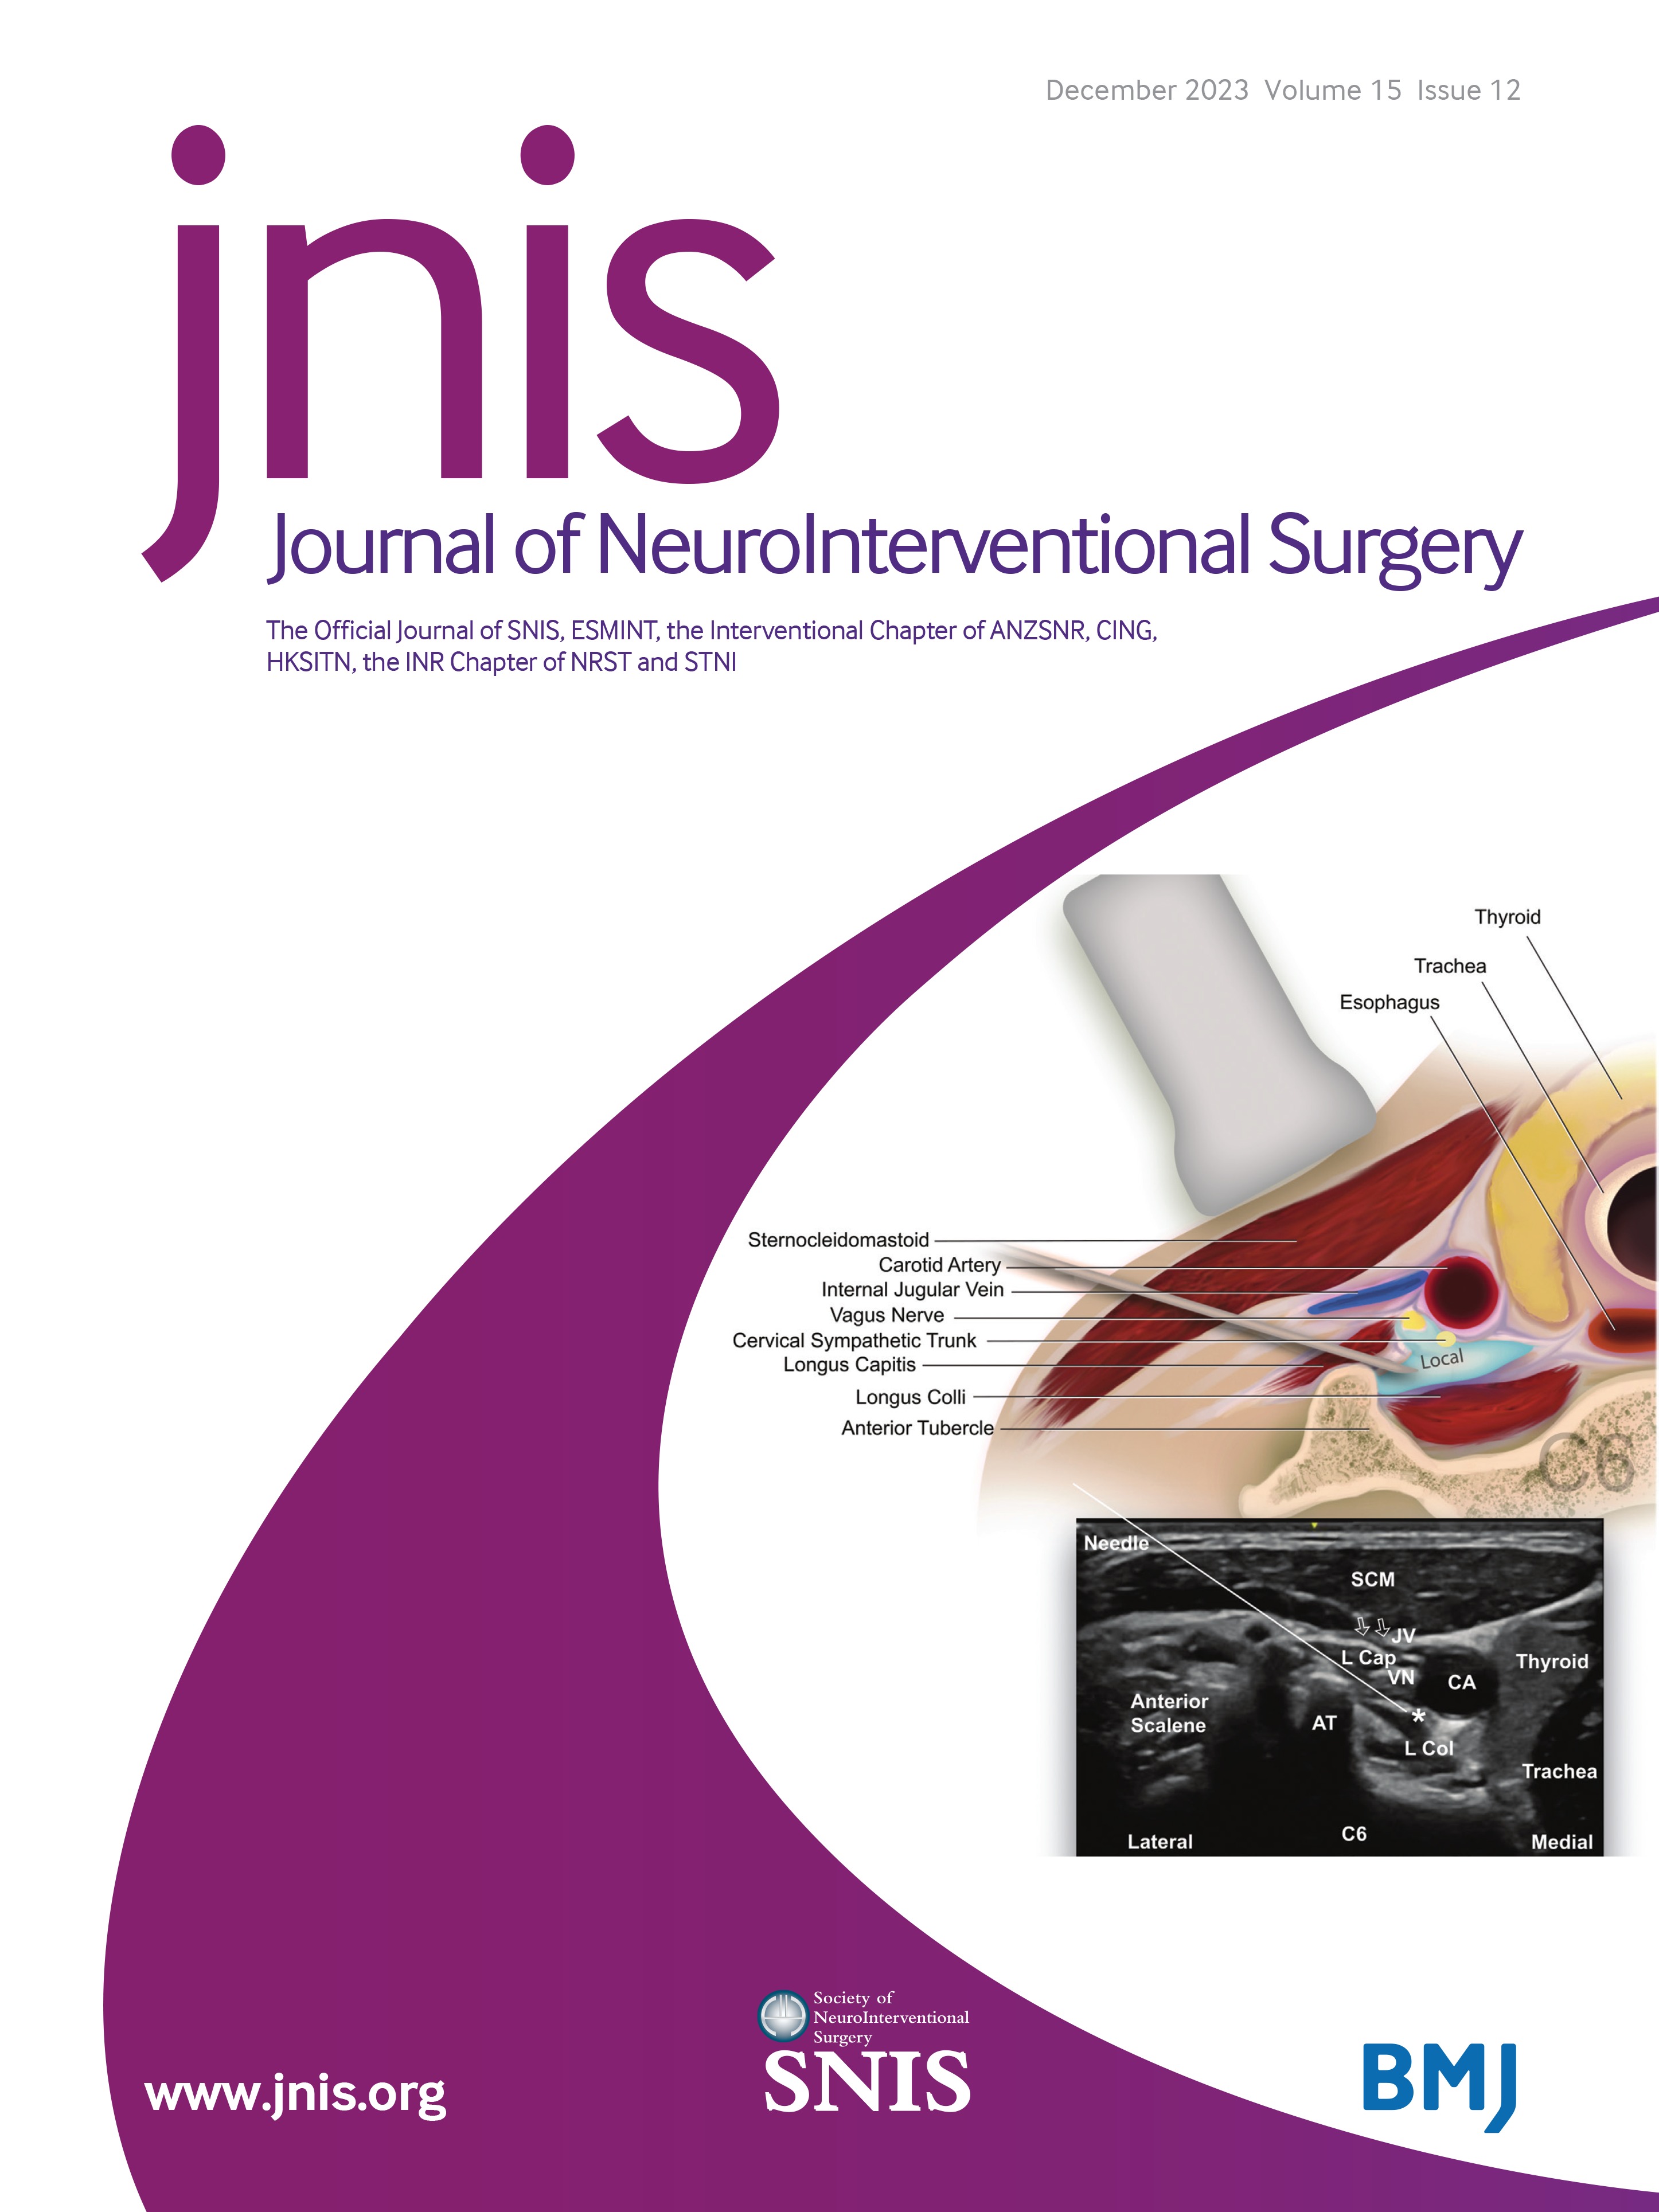 Percutaneous cervical sympathetic block to treat cerebral vasospasm and delayed cerebral ischemia: a review of the evidence